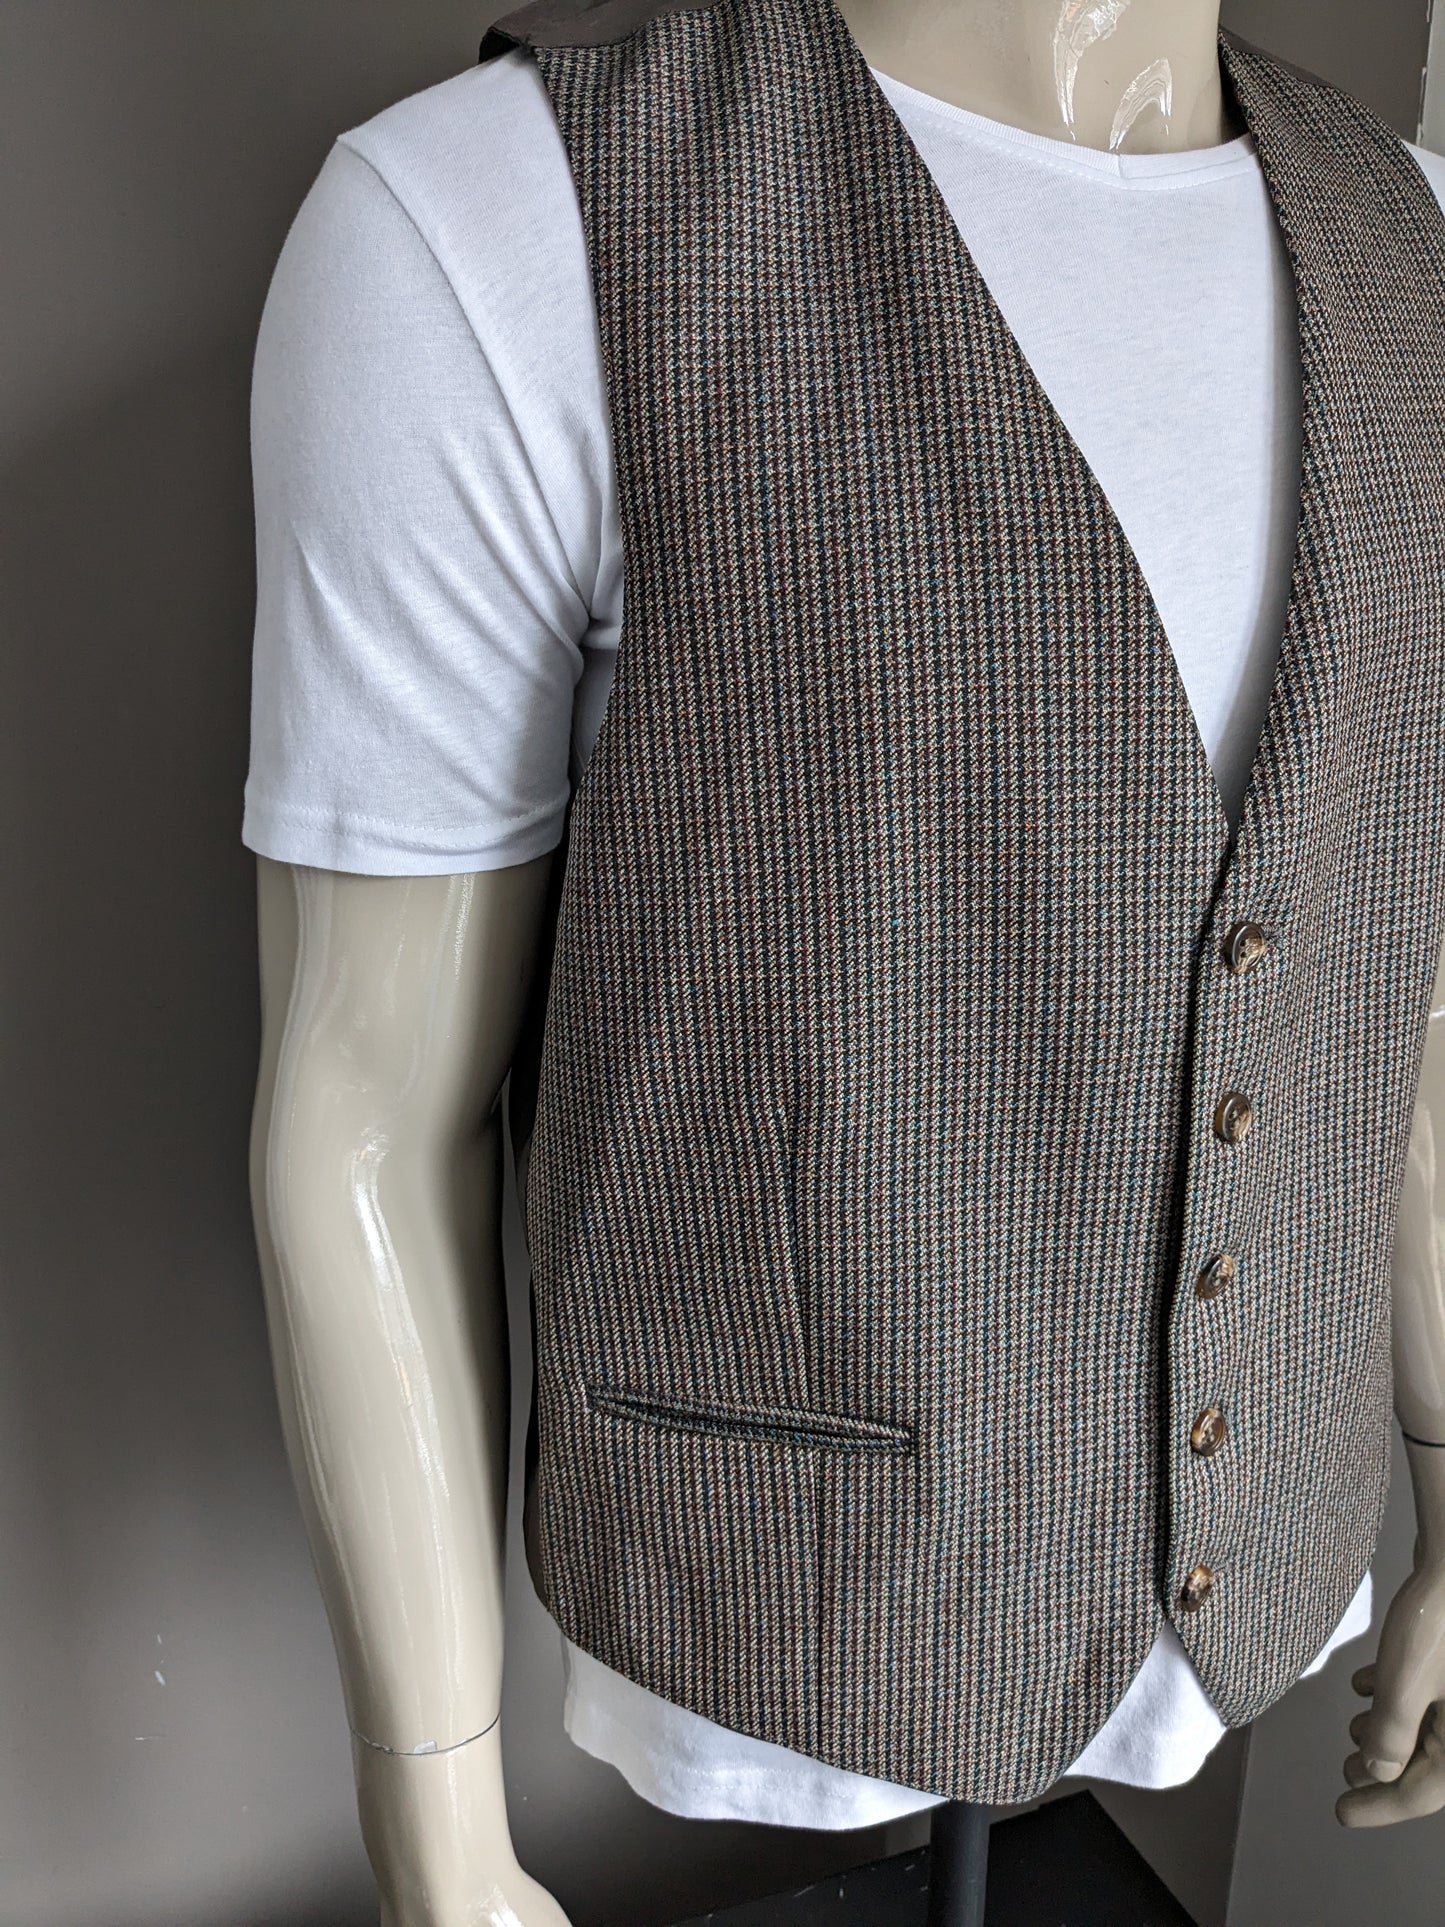 Waistcoat. Brown black checked with blue red green dots. Size L.